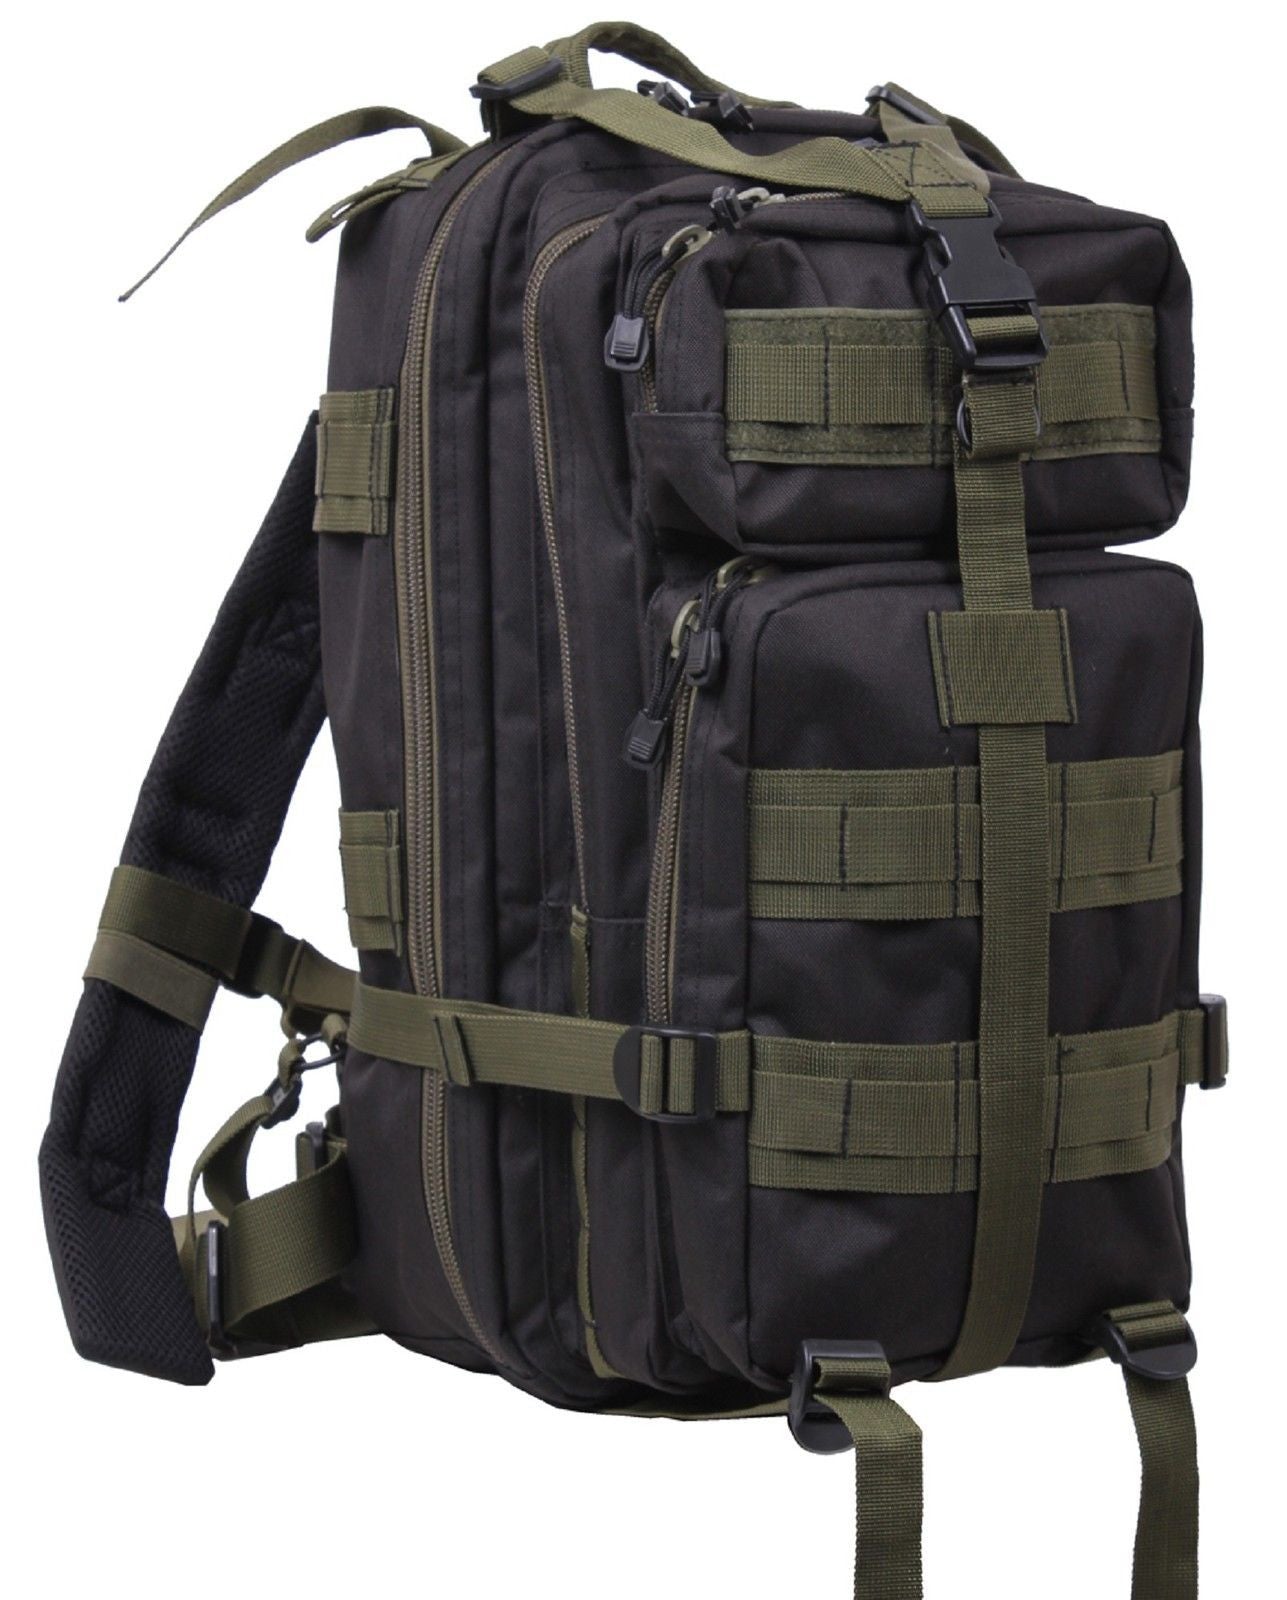 Olive Drab & Black Medium Transport Pack - Rothco 17" MOLLE Tactical Backpack